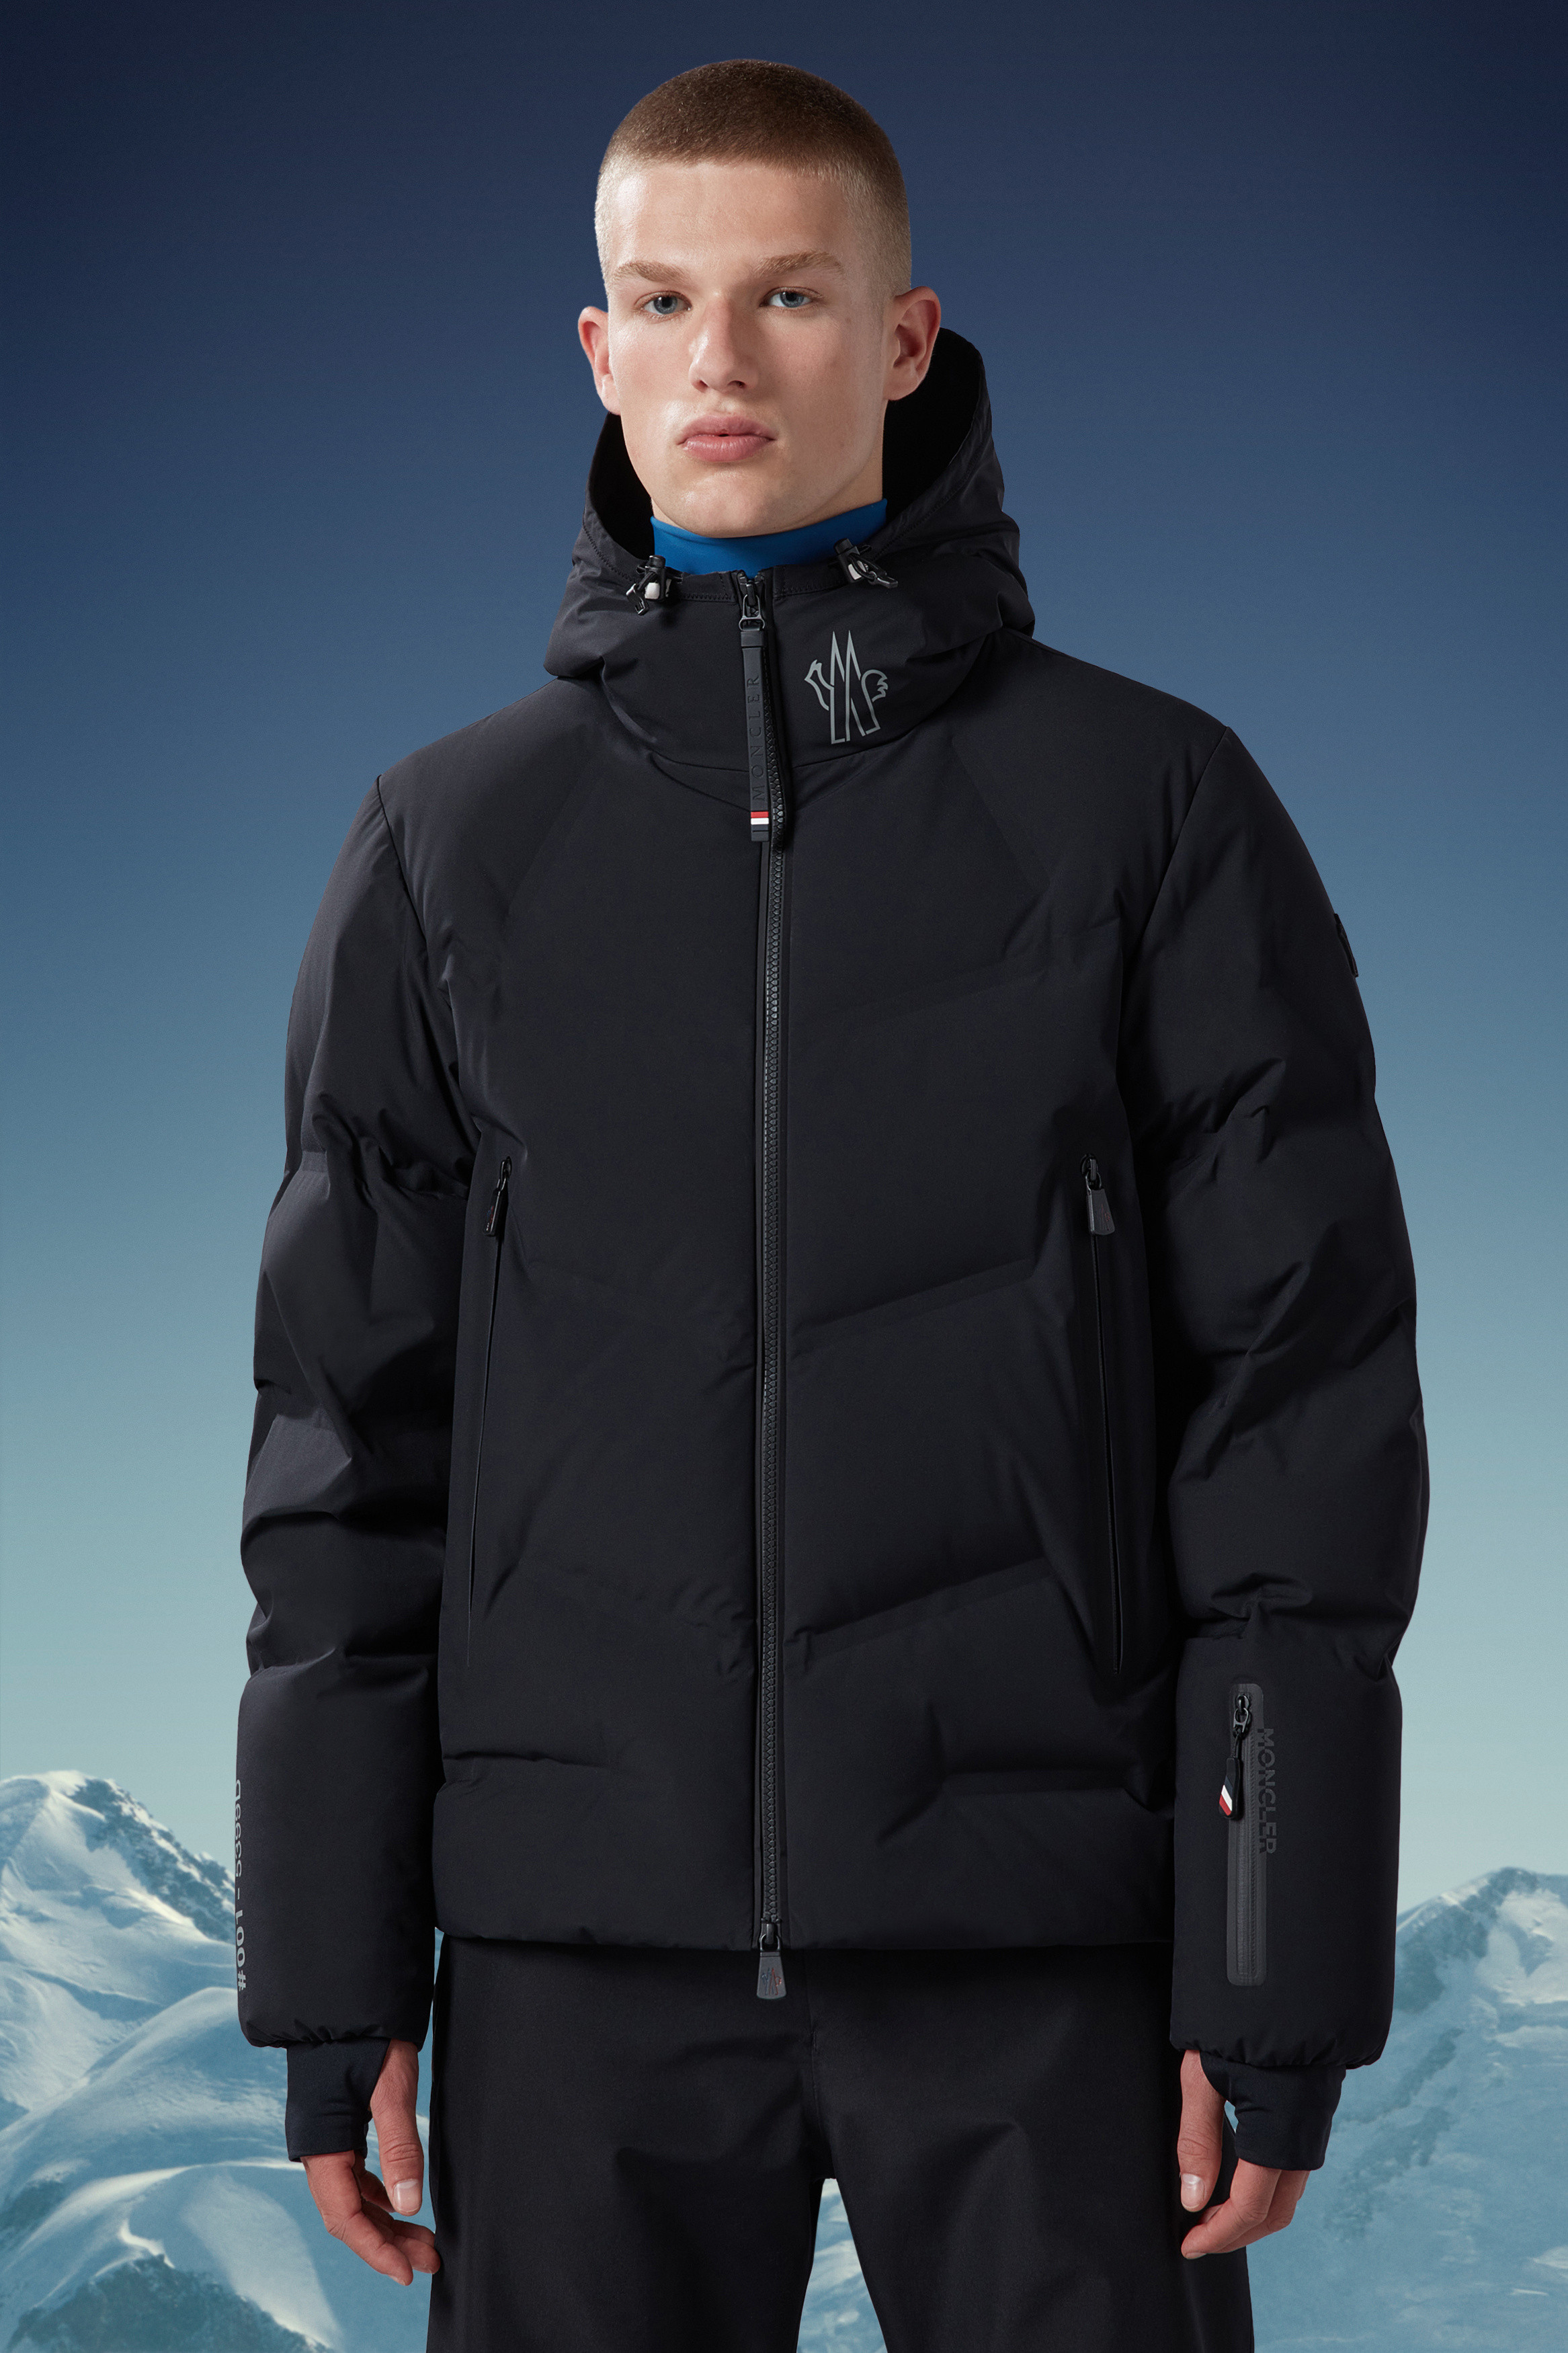 moncler - black  Skiing outfit, Snow outfit, Snow fashion